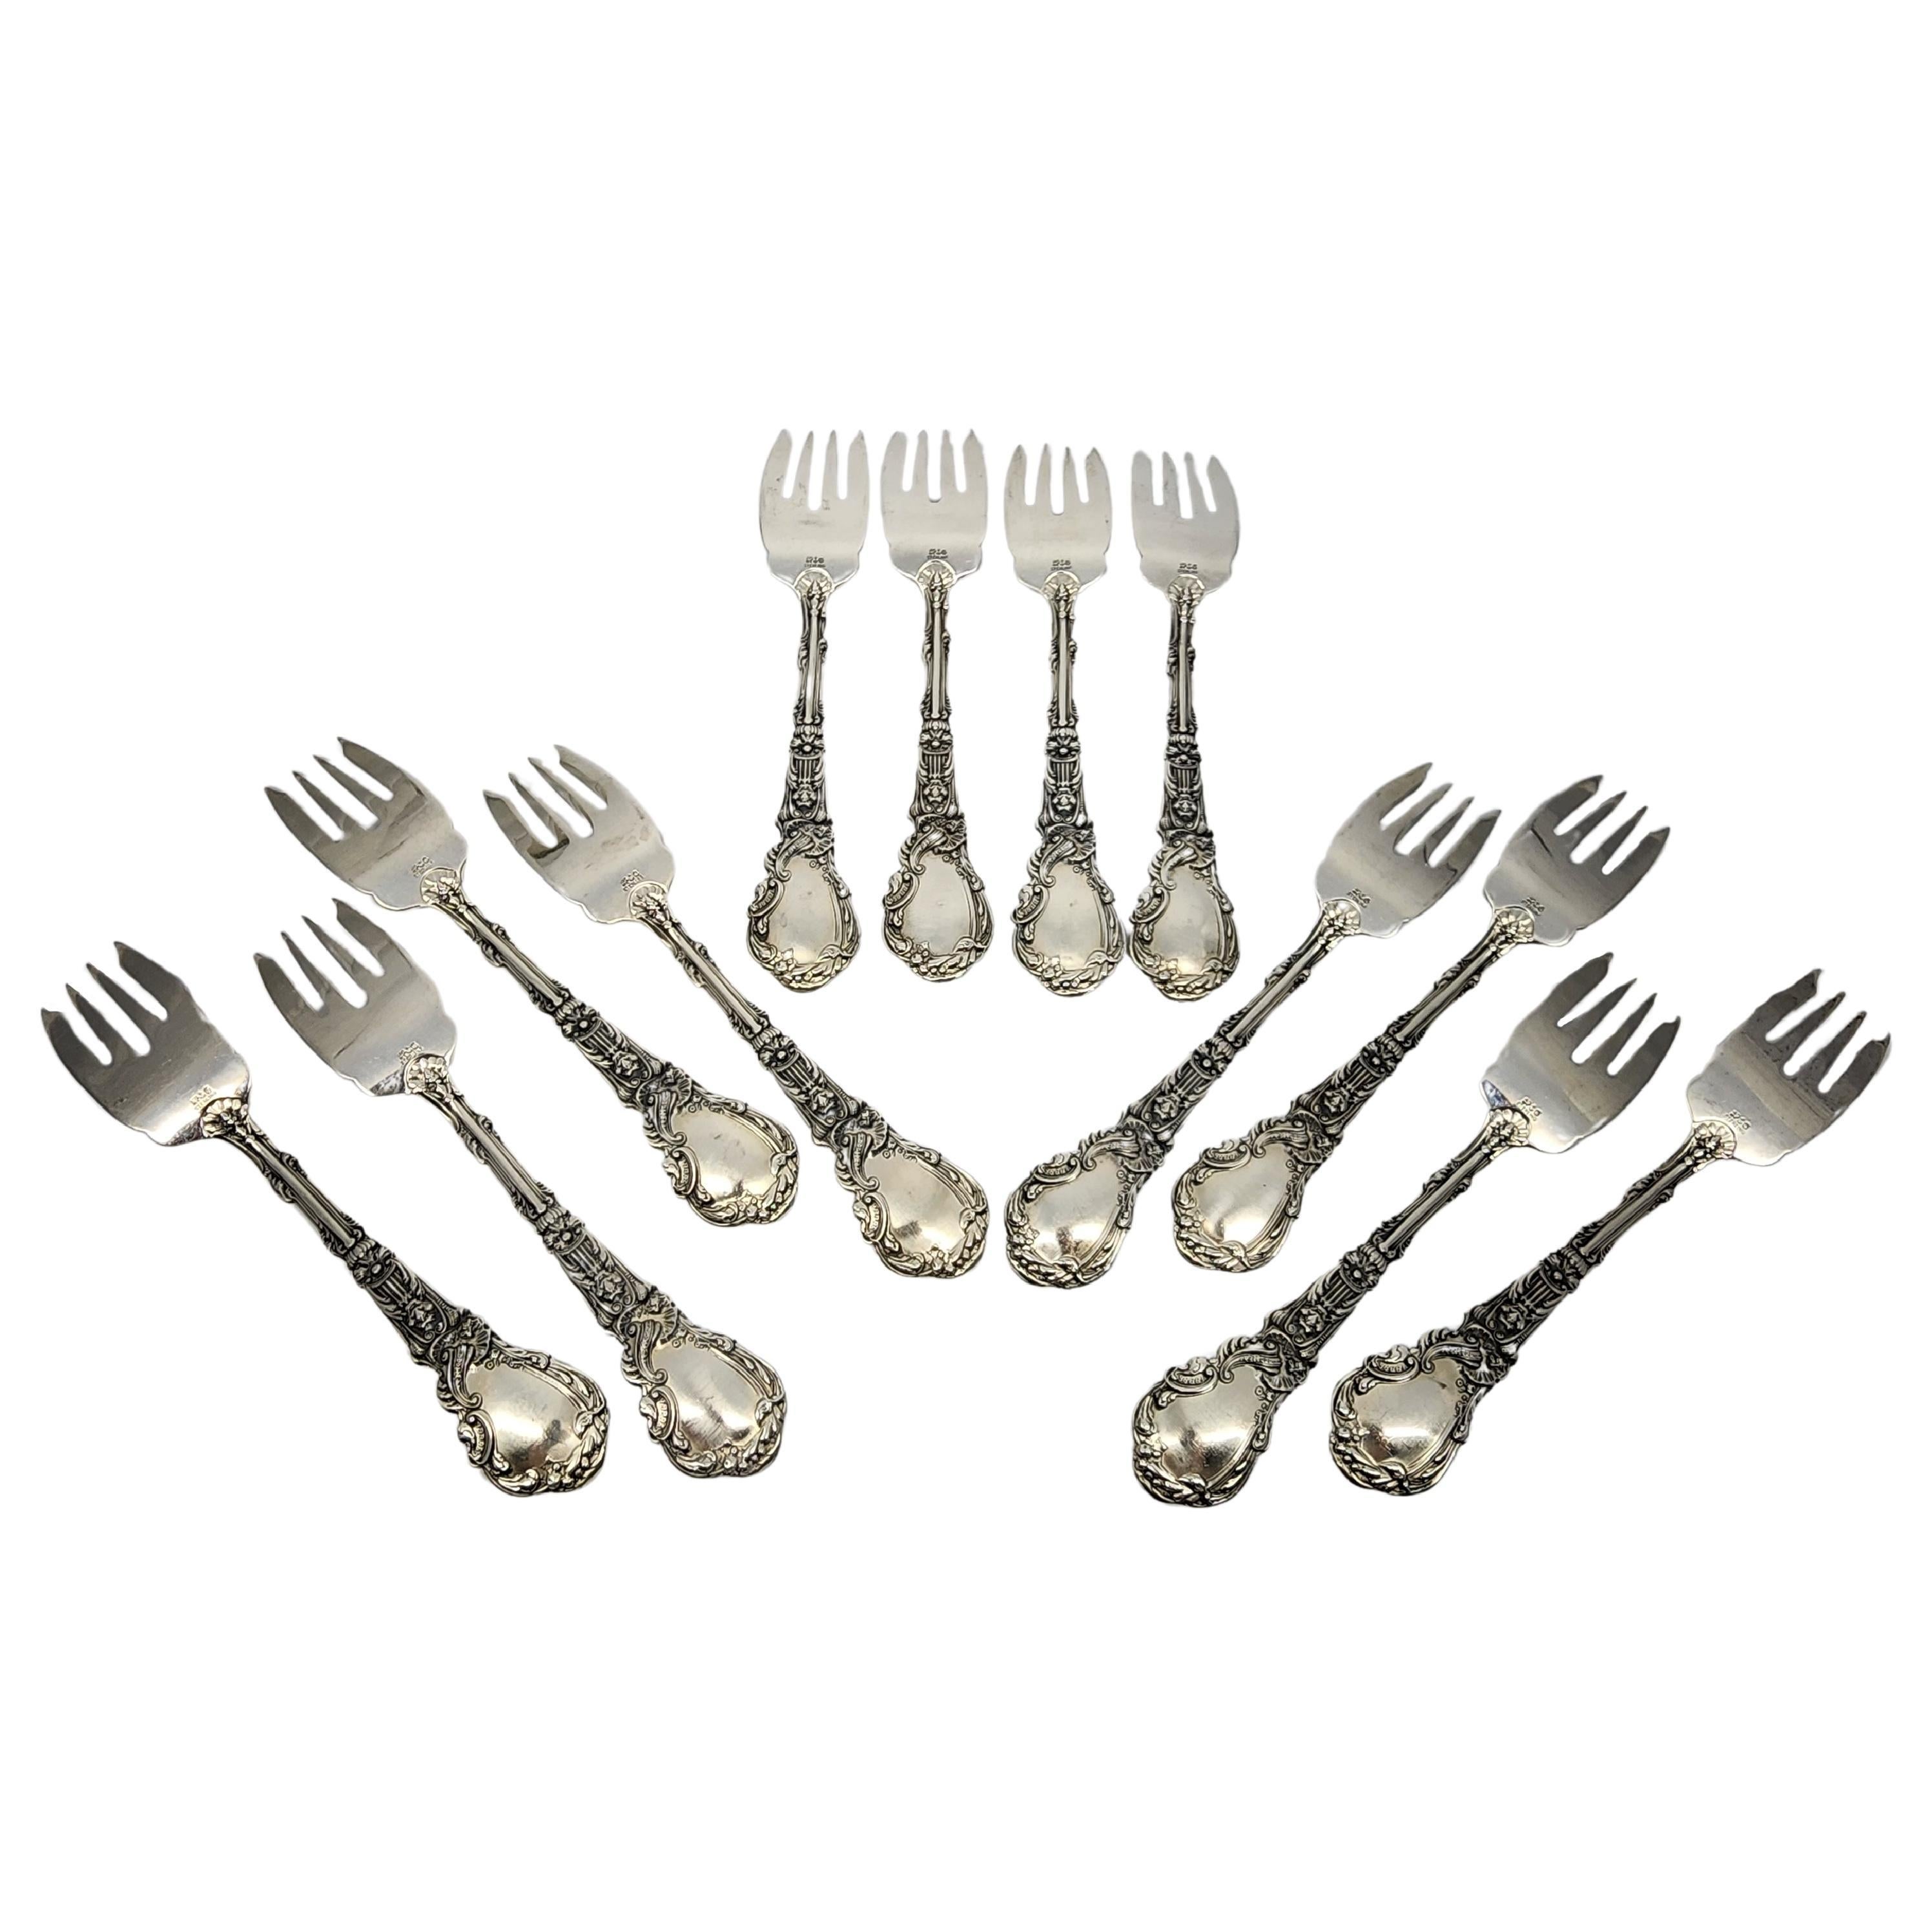 Set of 12 sterling silver salad forks by Gorham in the Versailles pattern.

No monogram.

Gorham's Versailles is a multi motif pattern designed by Antoine Heller in 1885. Named for the Palace of Versailles, the pattern depicts ornate scenes of